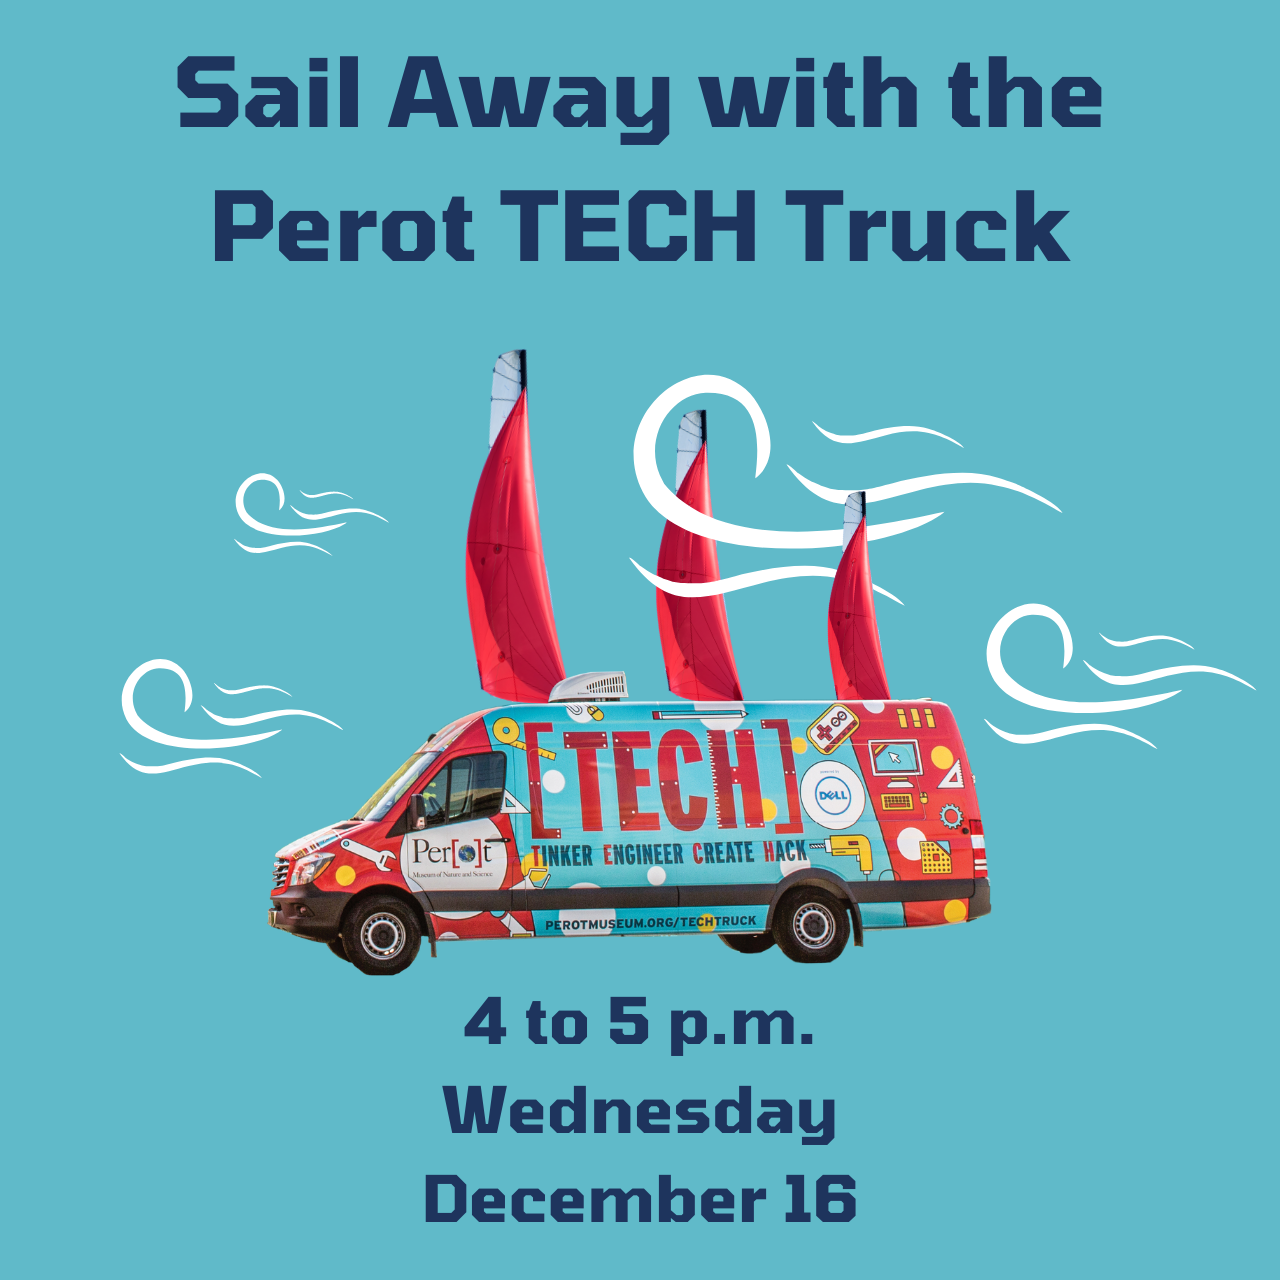 Sail Away with the Perot TECH Truck